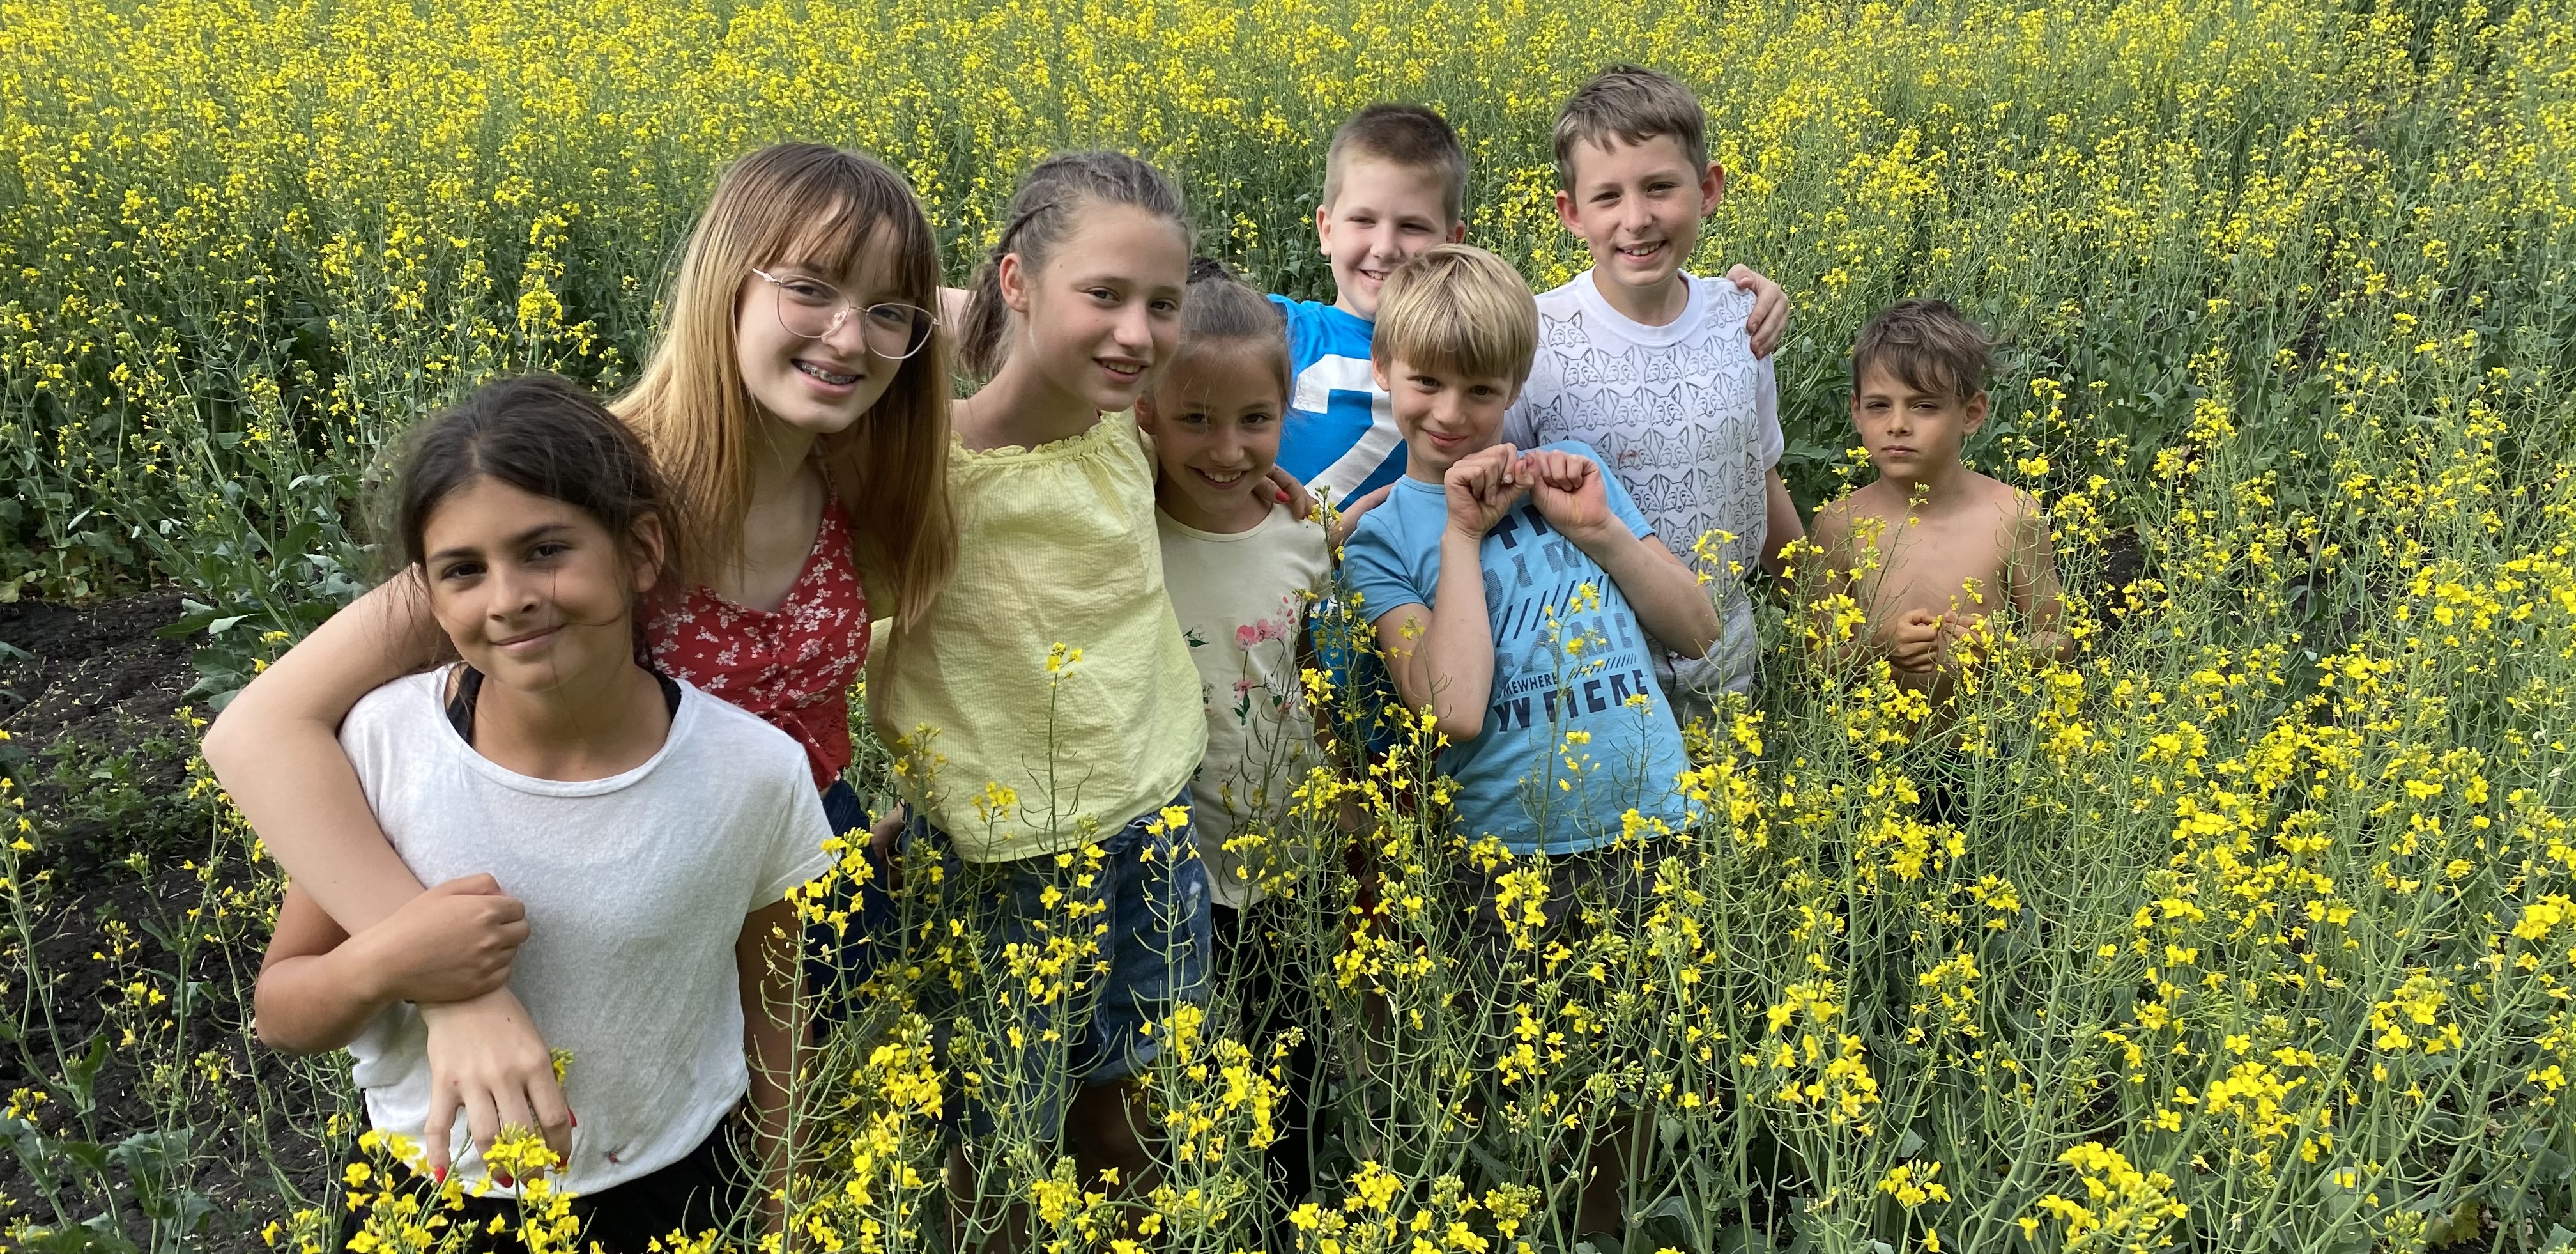 Kids smiling in the Meadow